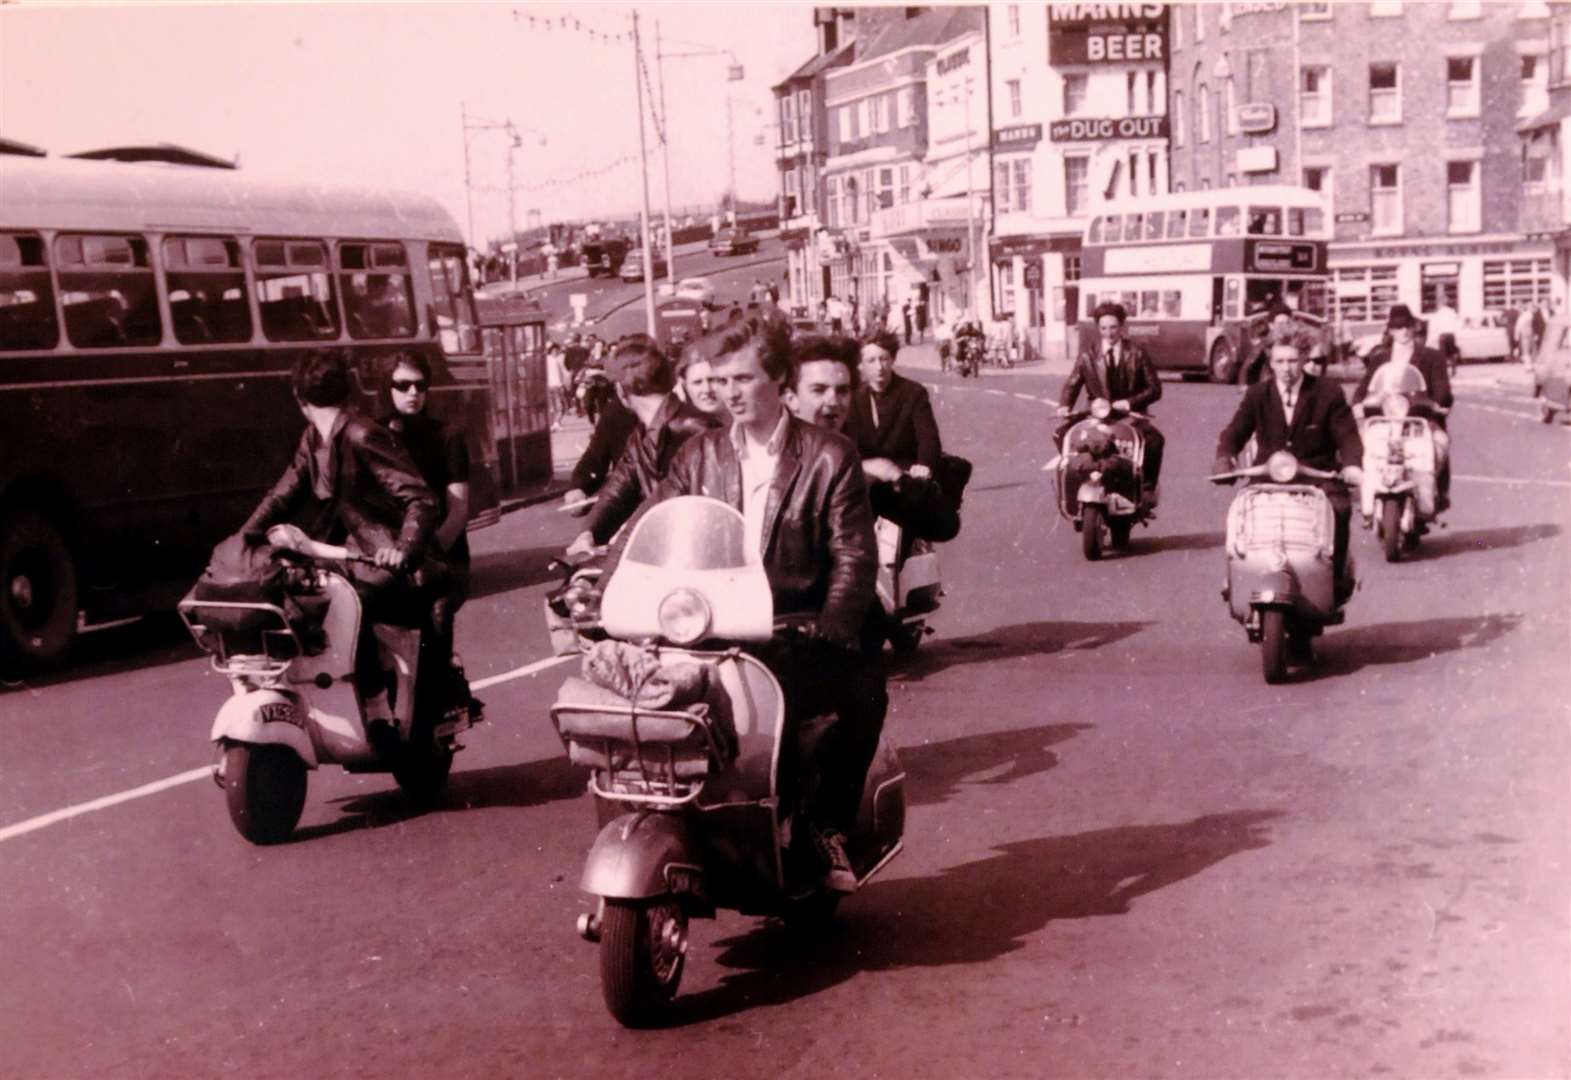 Mods Vs. Rockers: When The Youth Of The 60s UK Erupted Into Violence